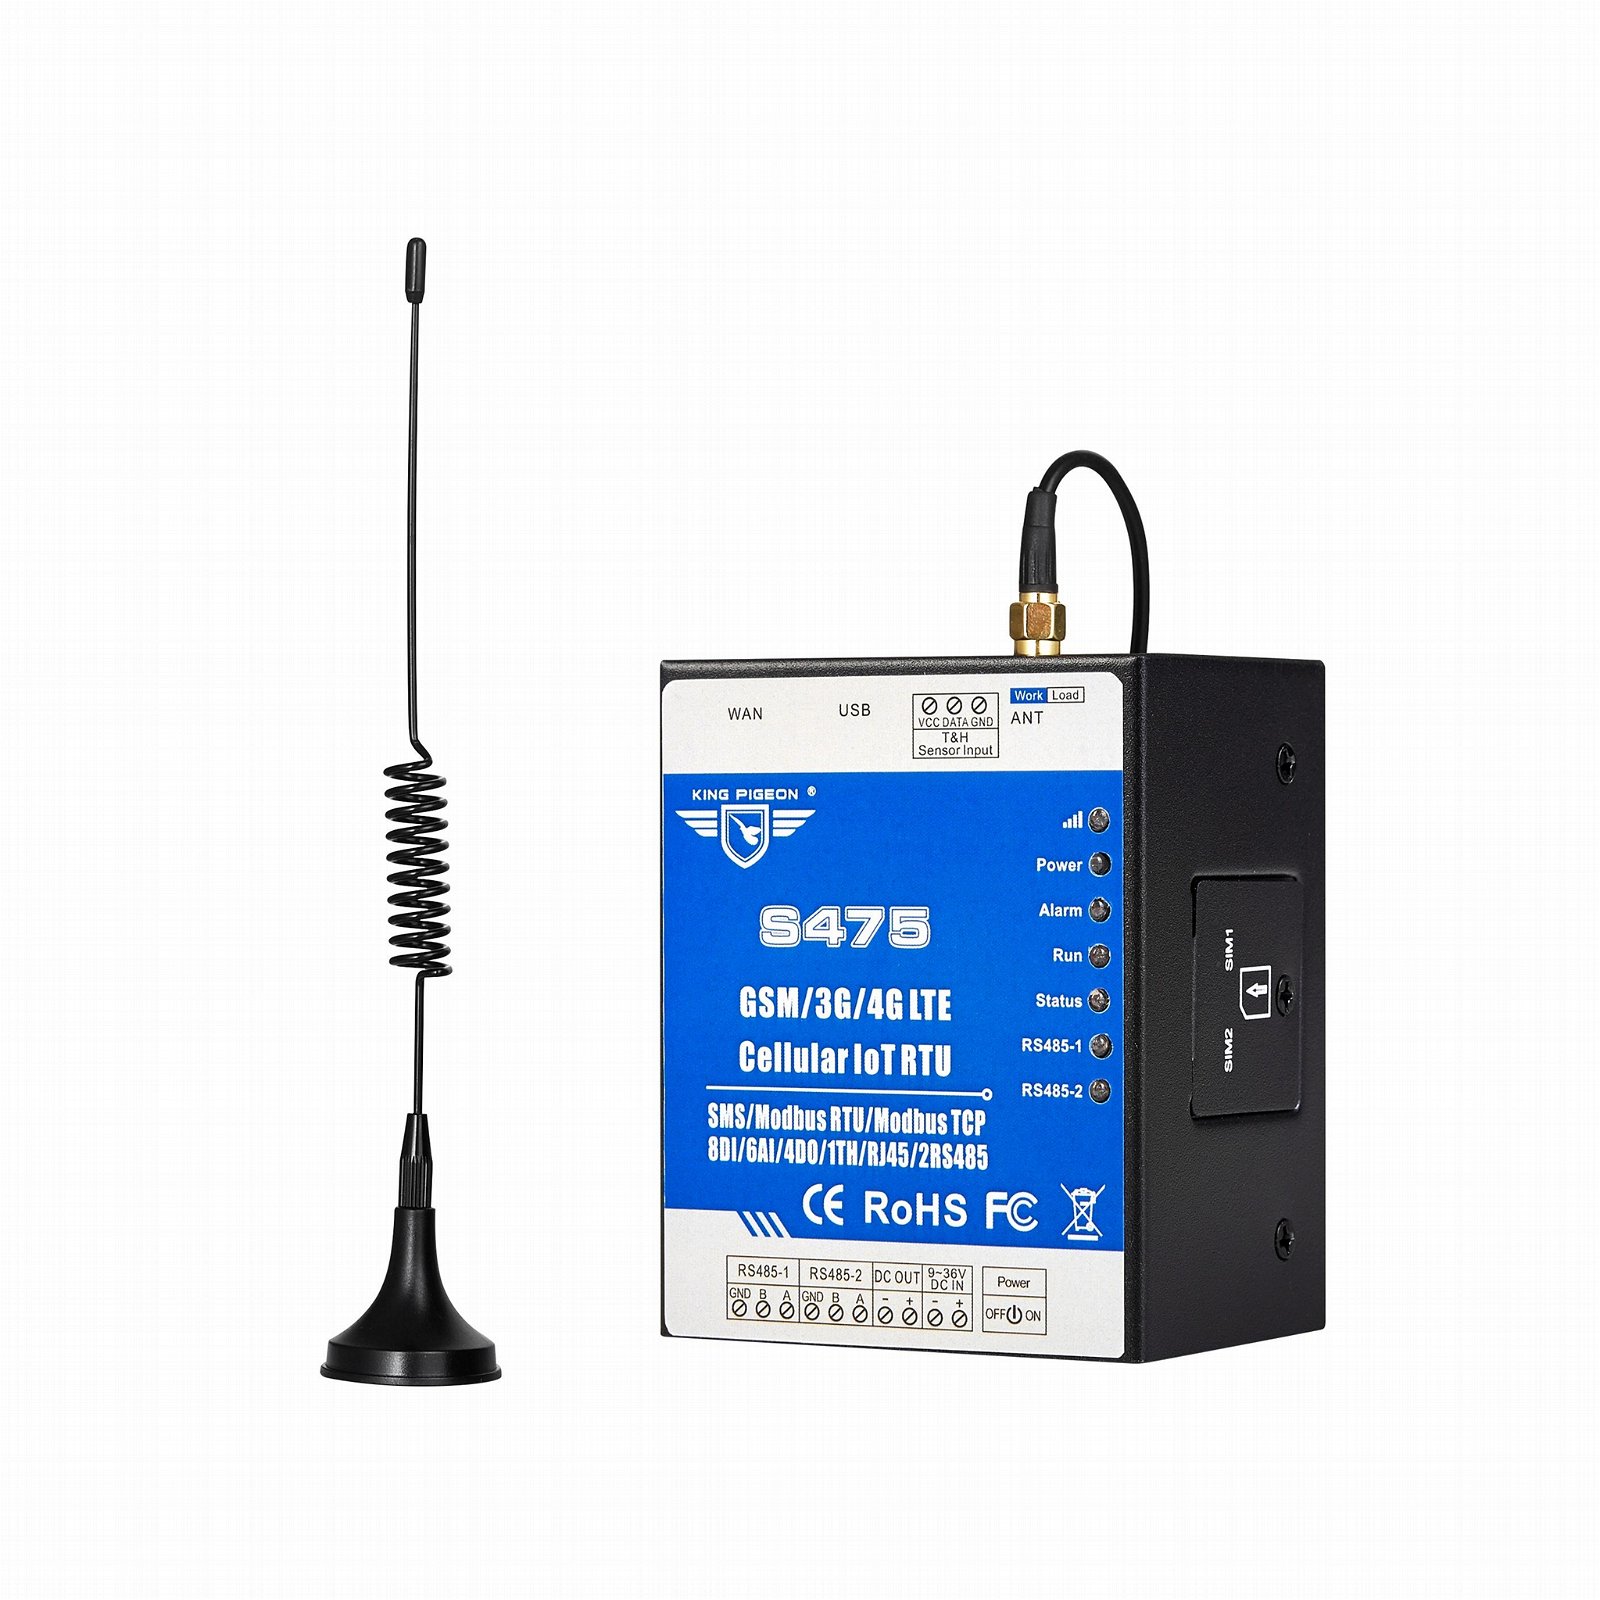 GSM 3G 4G LTE Cellular IoT Gateway can be used in a variety of industrial automa 2